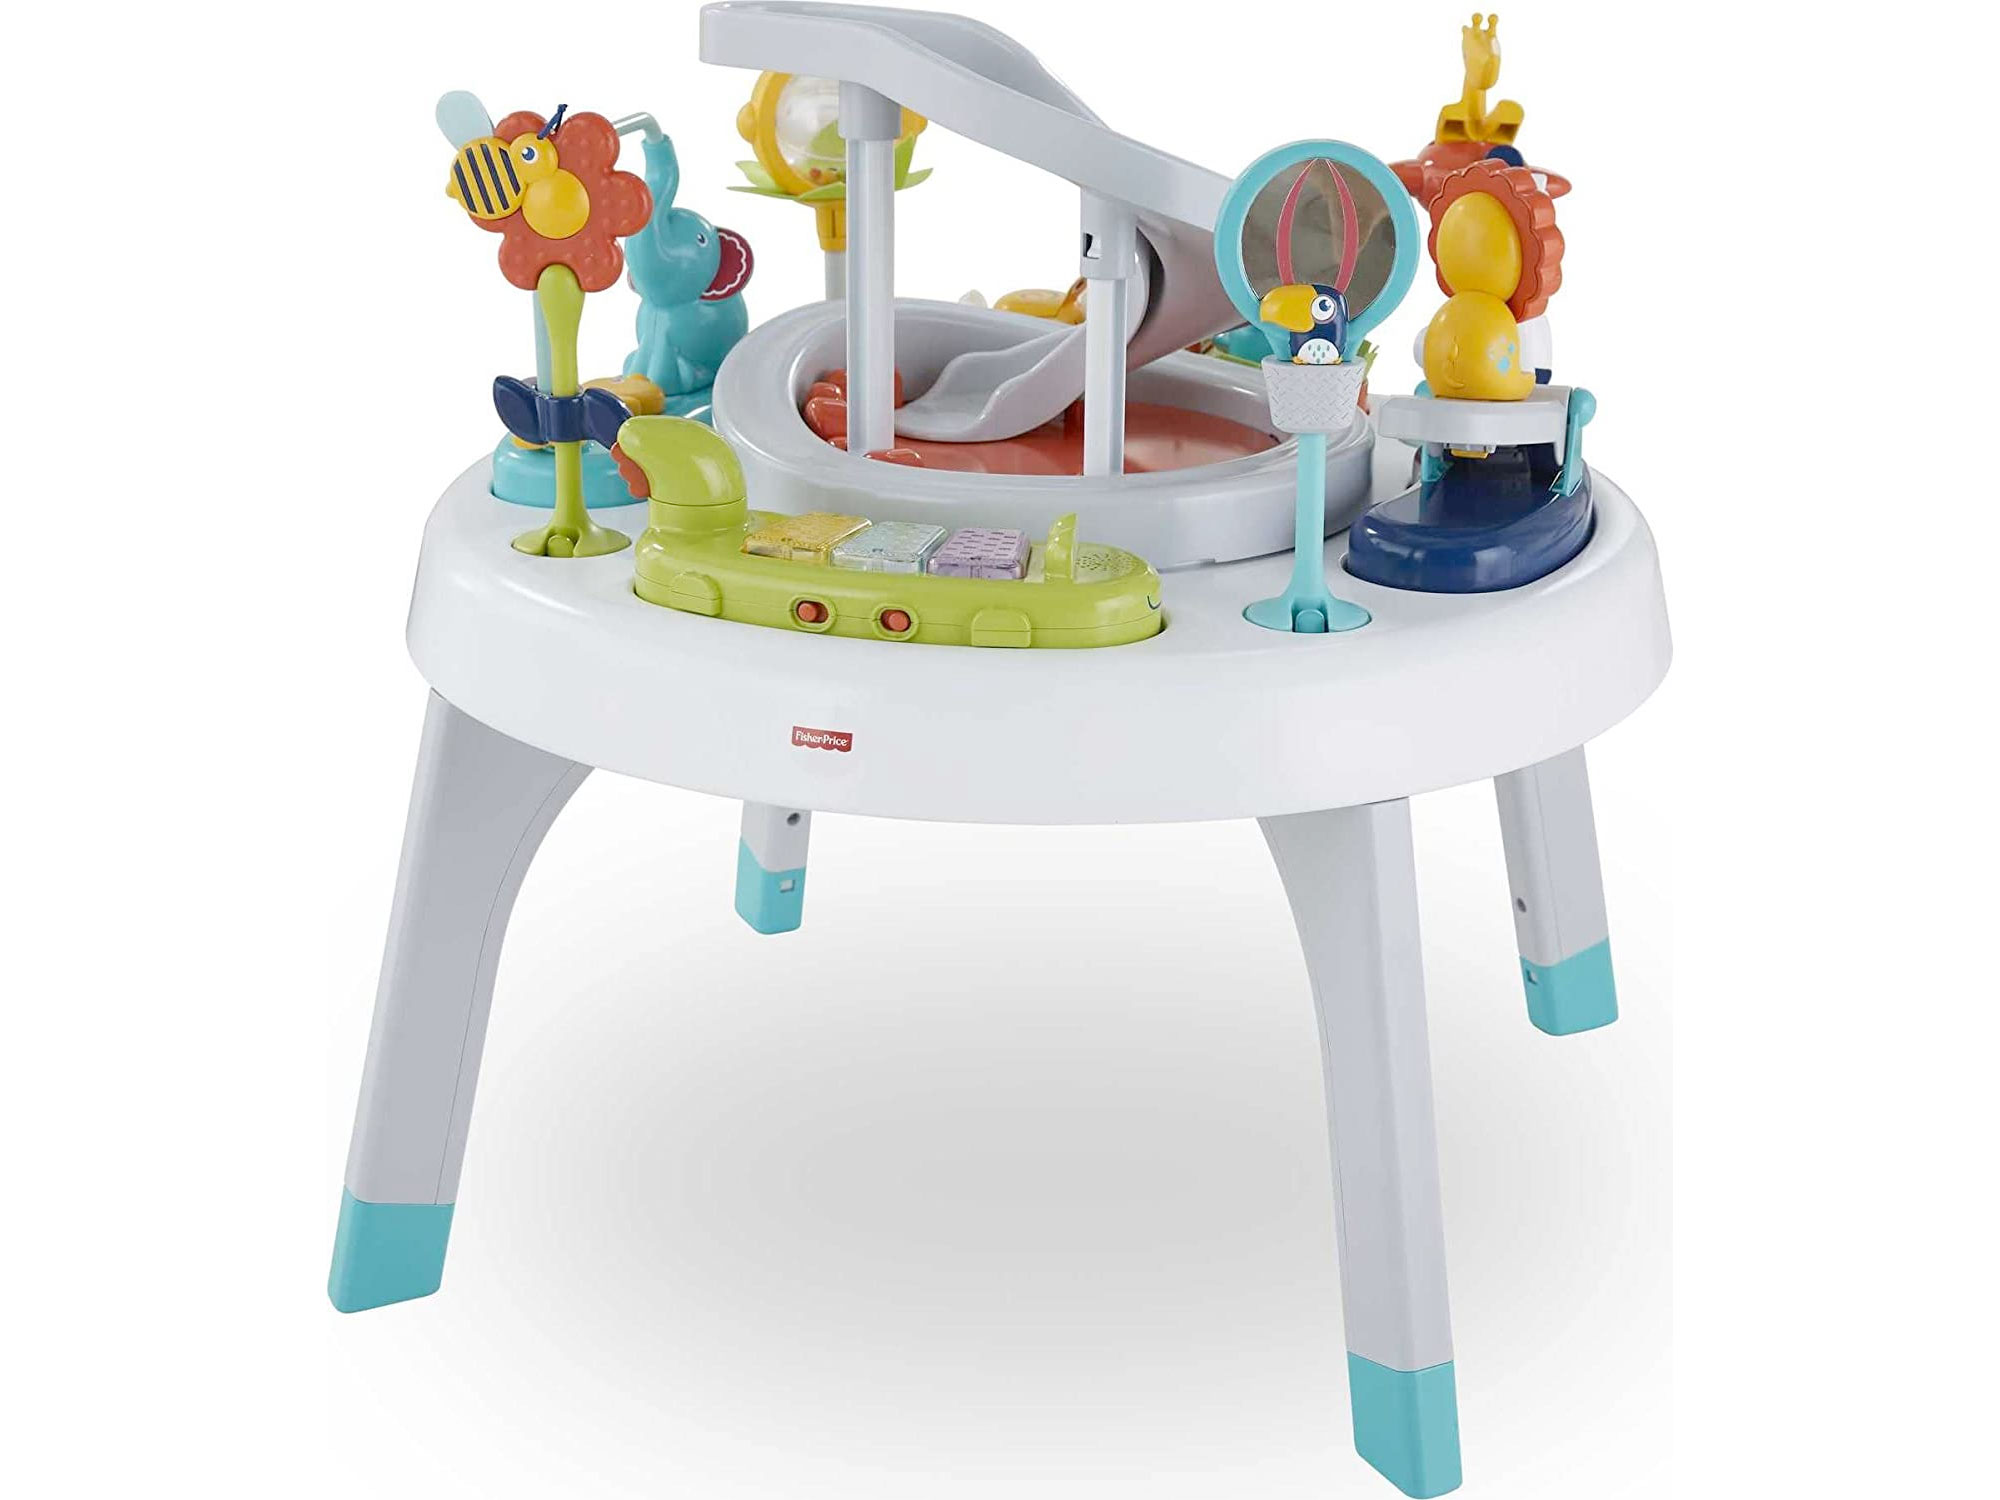 Amazon：Fisher-Price 2-in-1 Sit-to-Stand Activity Center只賣$79.99